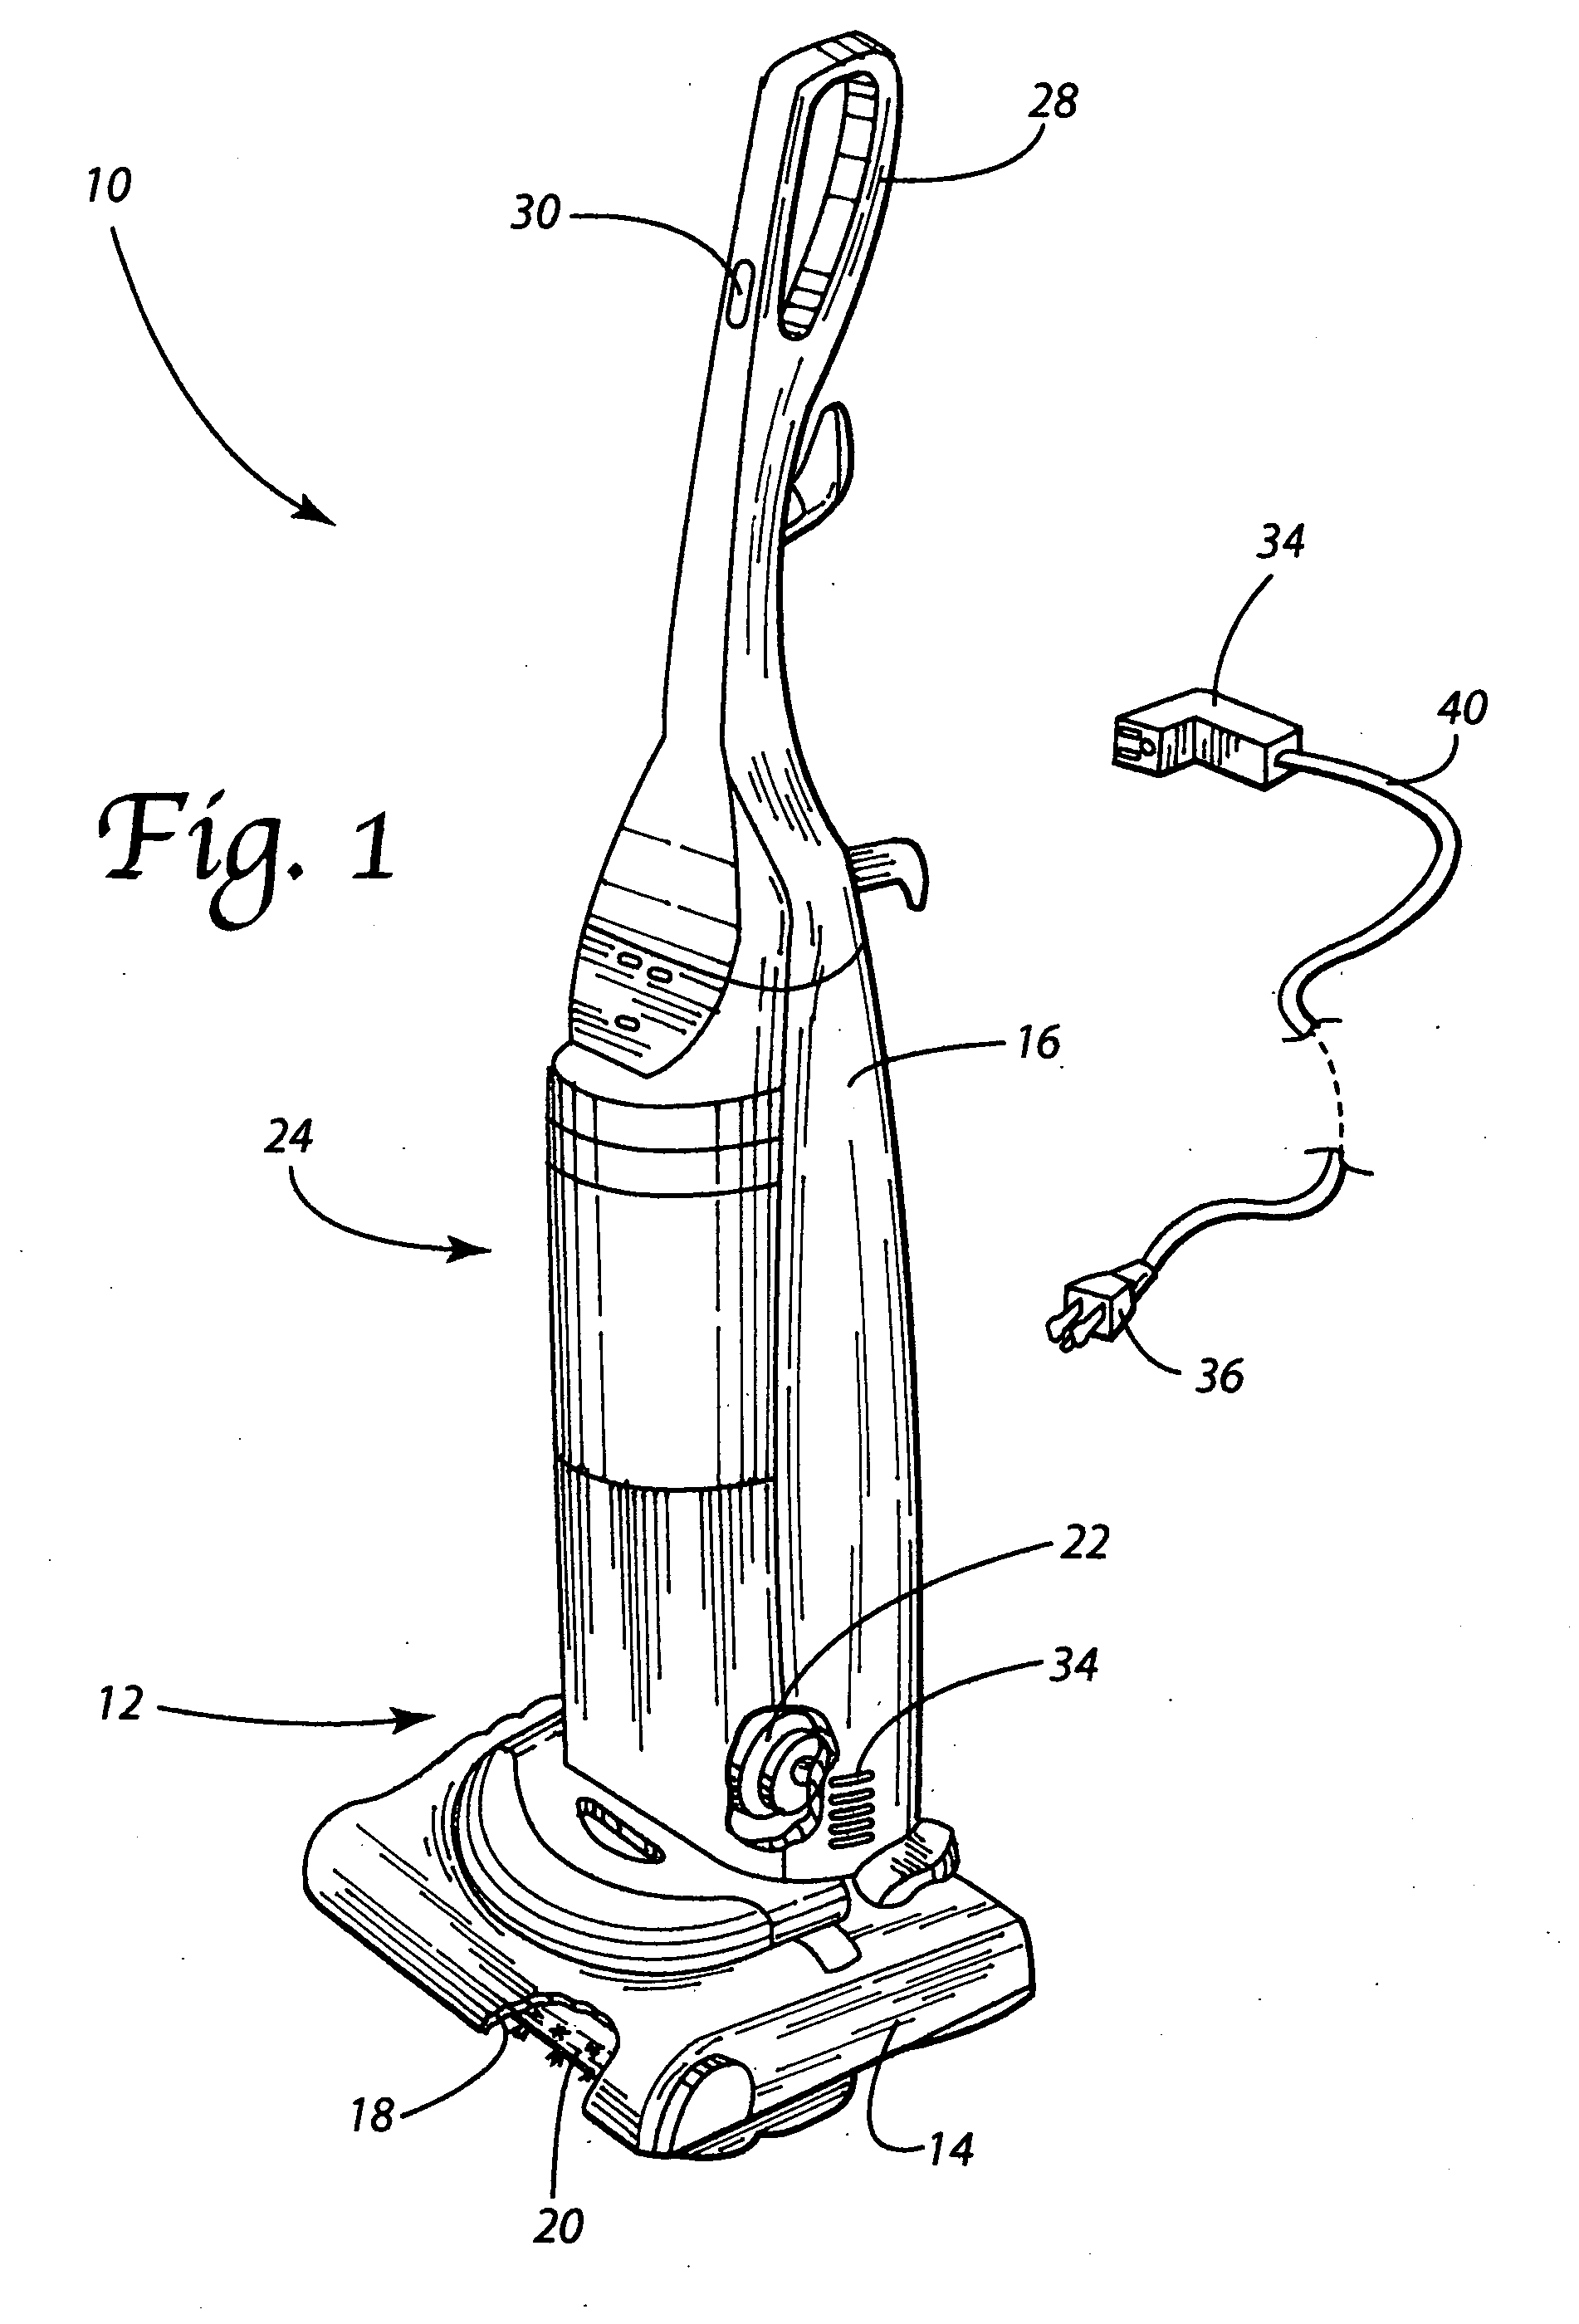 Floor care appliance equipped with detachable power cord